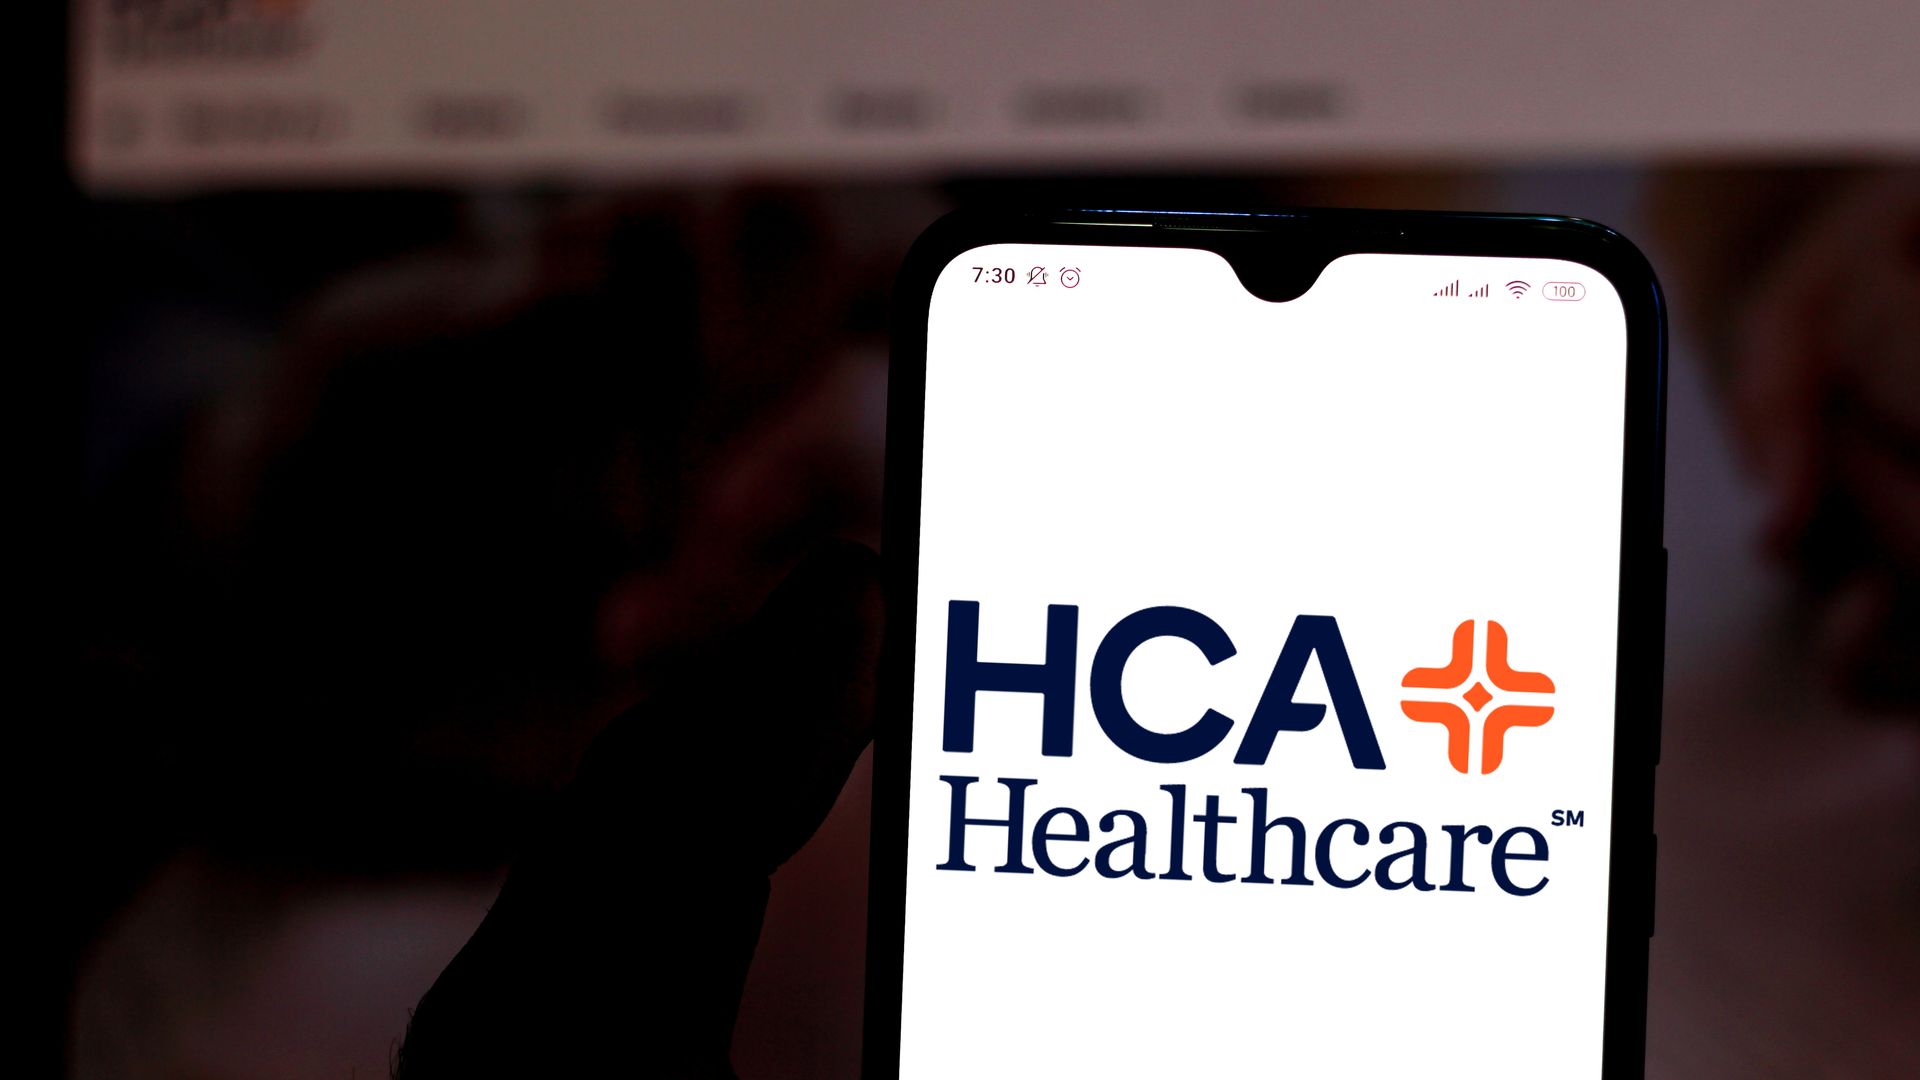 Picture of a phone that has the HCA Healthcare logo displayed on the screen